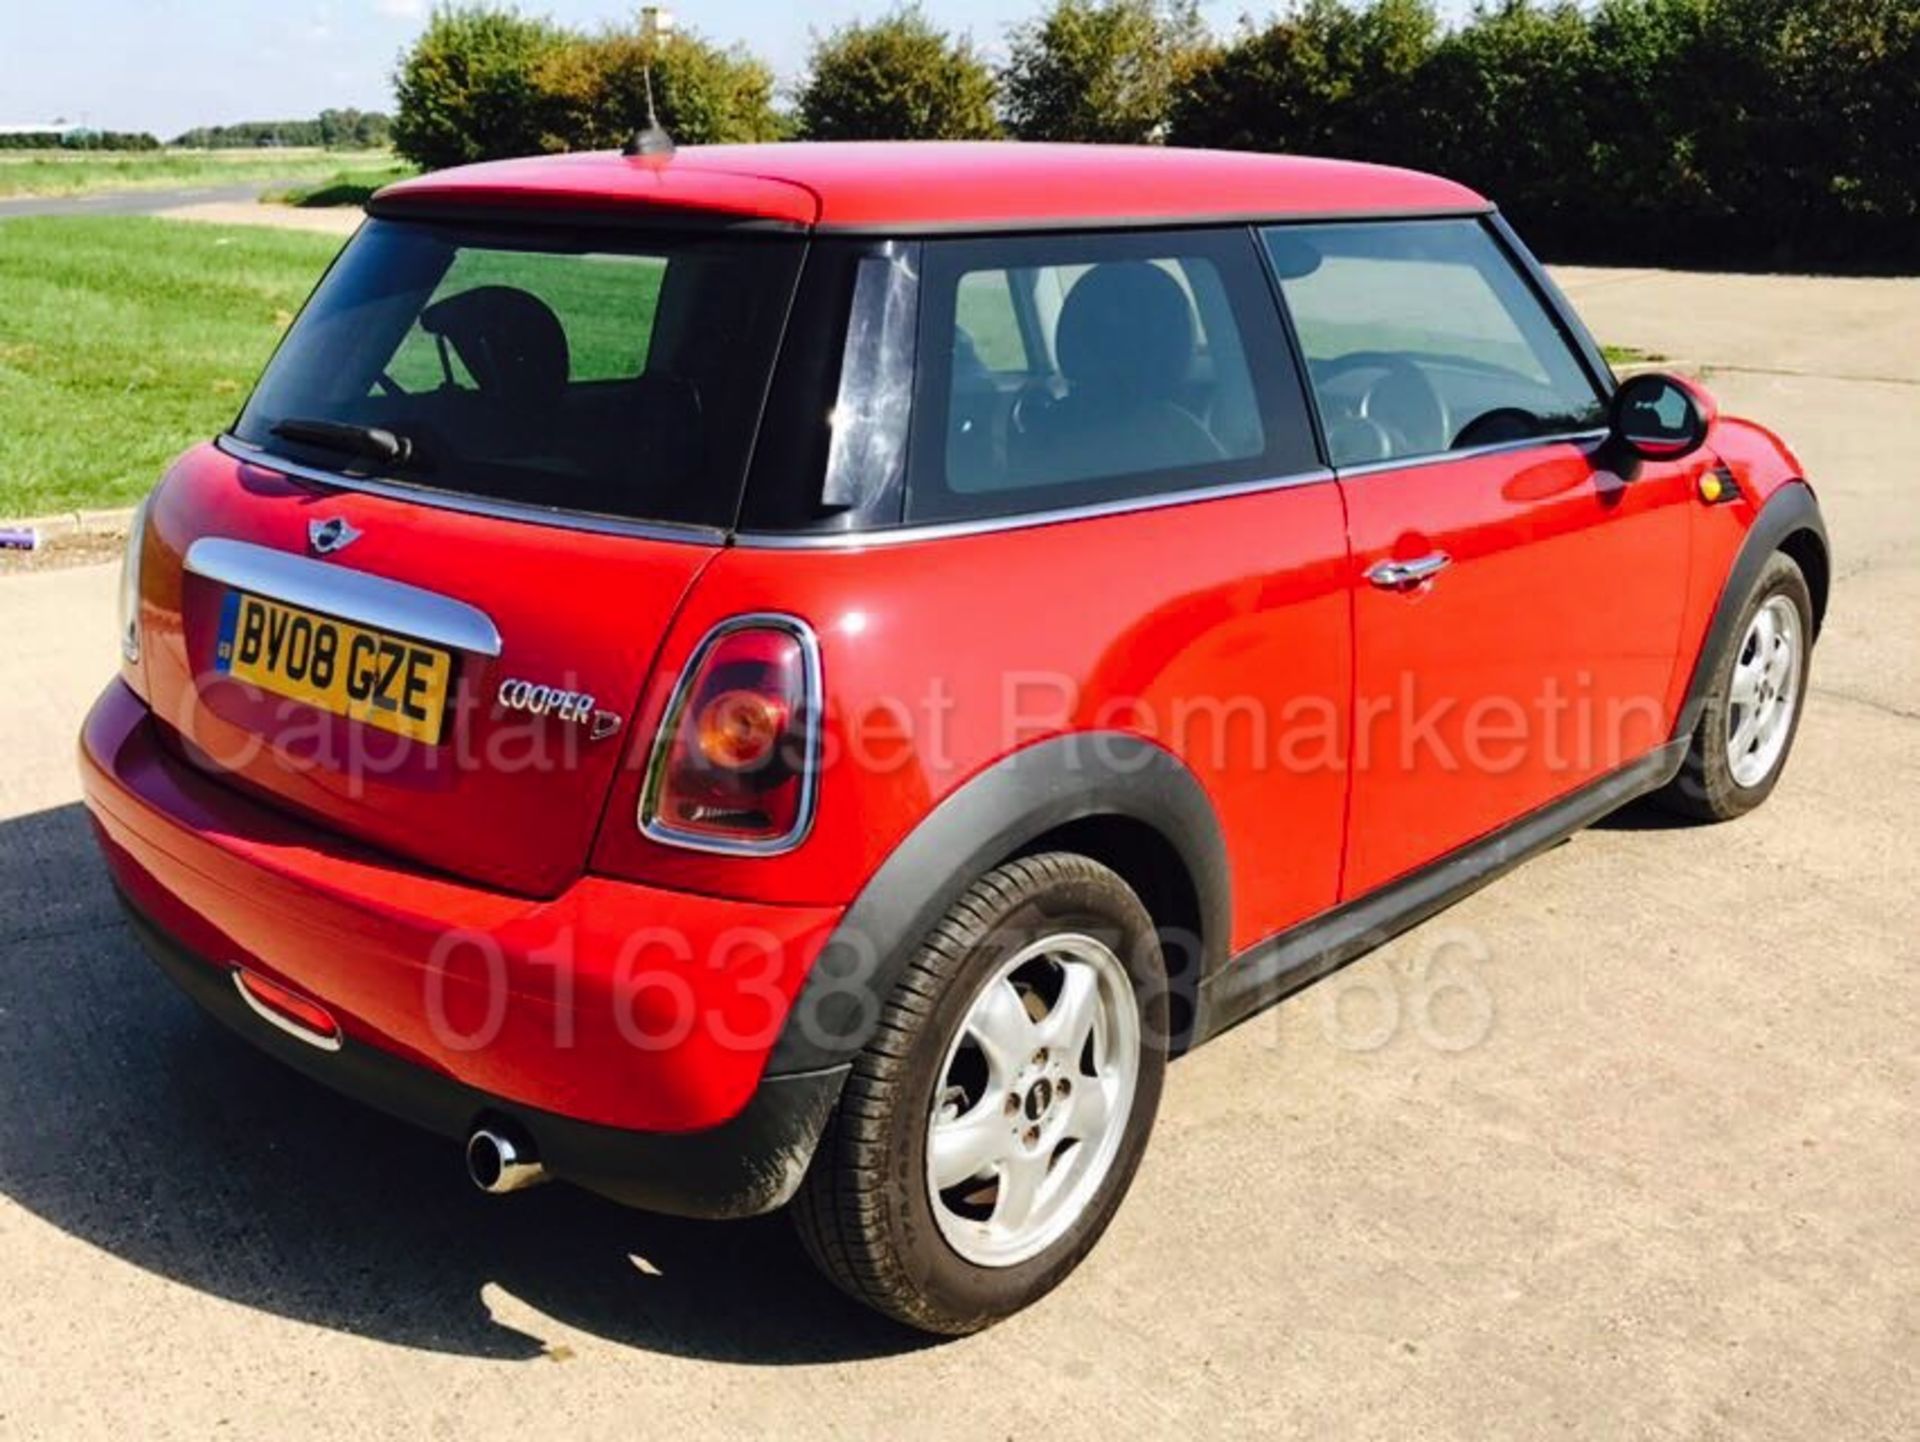 (On Sale) MINI COOPER D (2008) '1.6 DIESEL - 6 SPEED - STOP / START' **AIR CON** (NO VAT - SAVE 20%) - Image 7 of 19